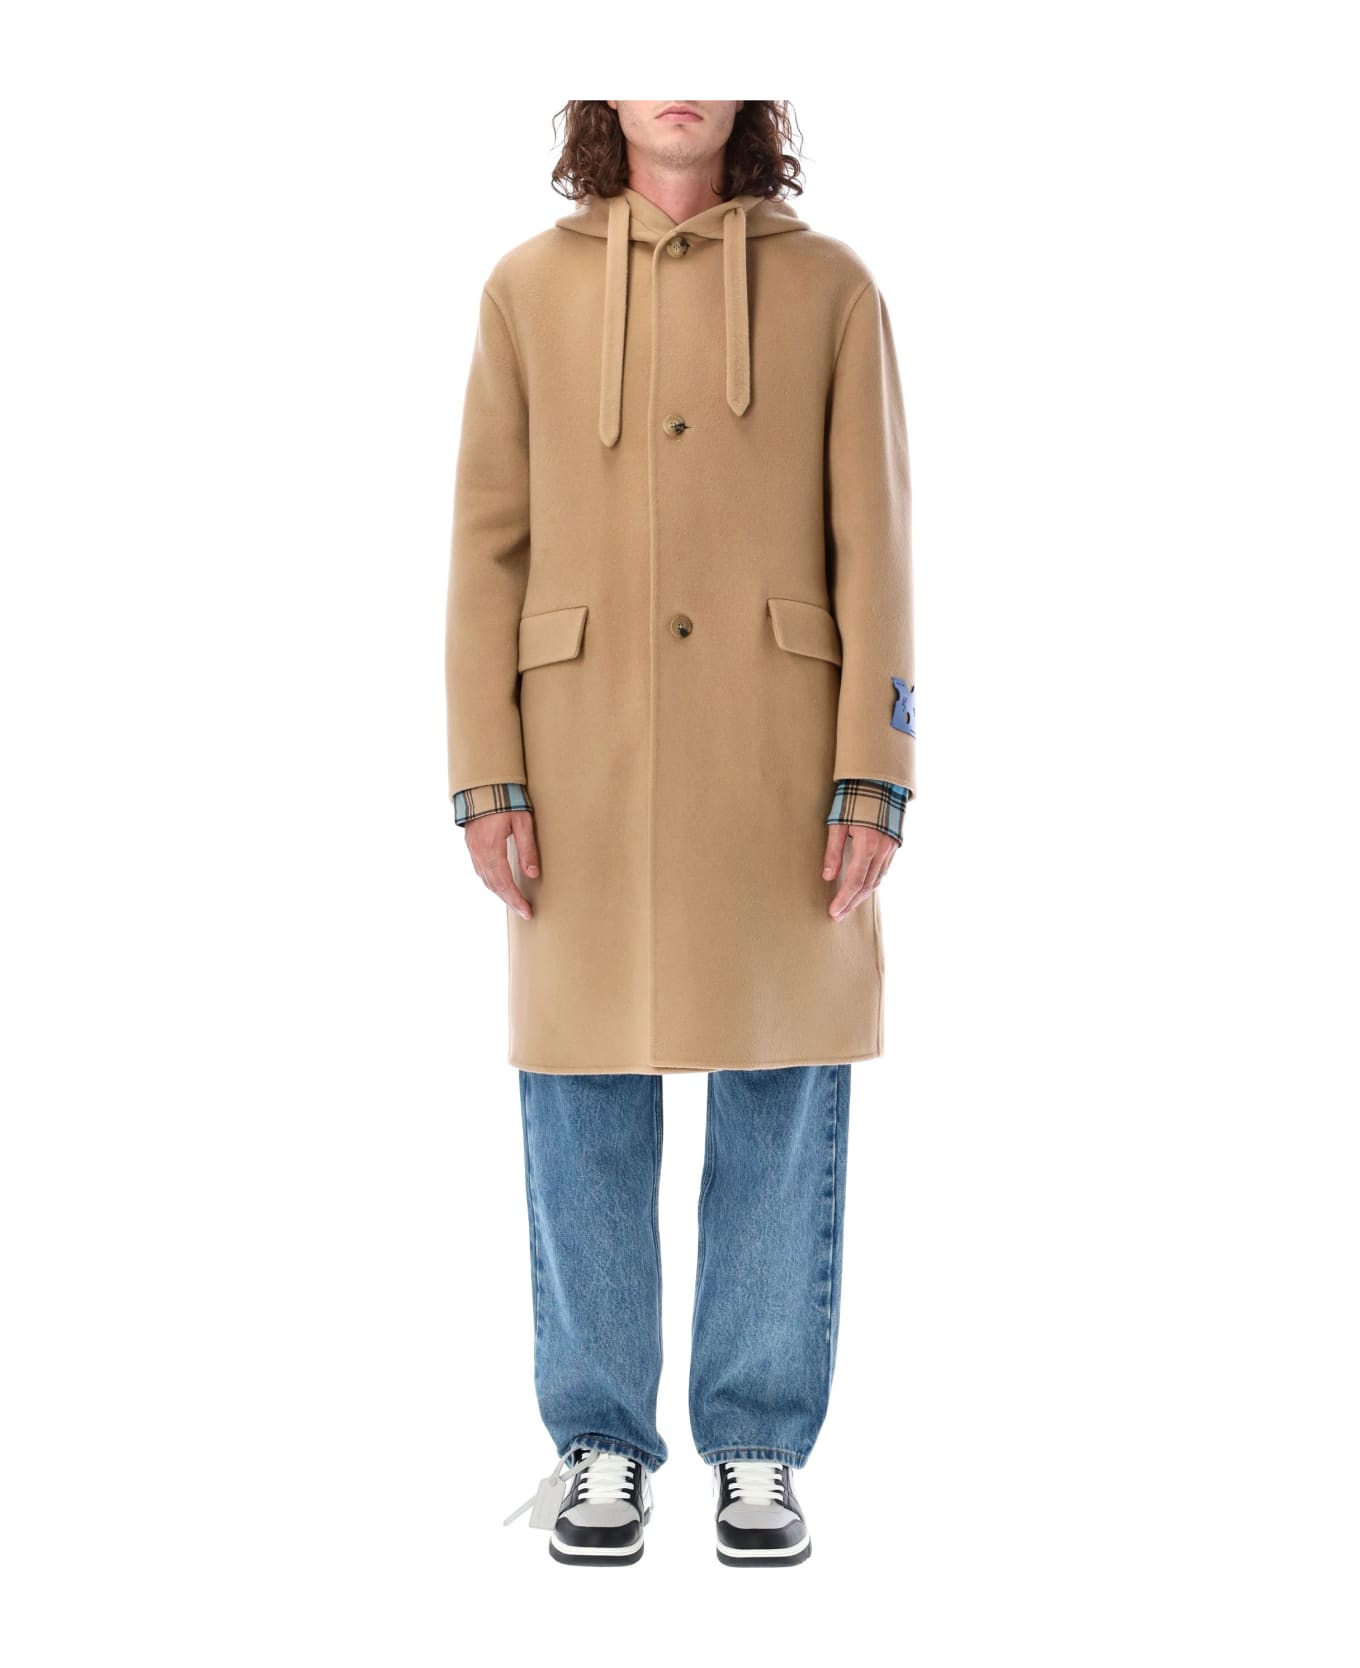 Off-White Tags Cashmere Hooded Coat - CAMEL